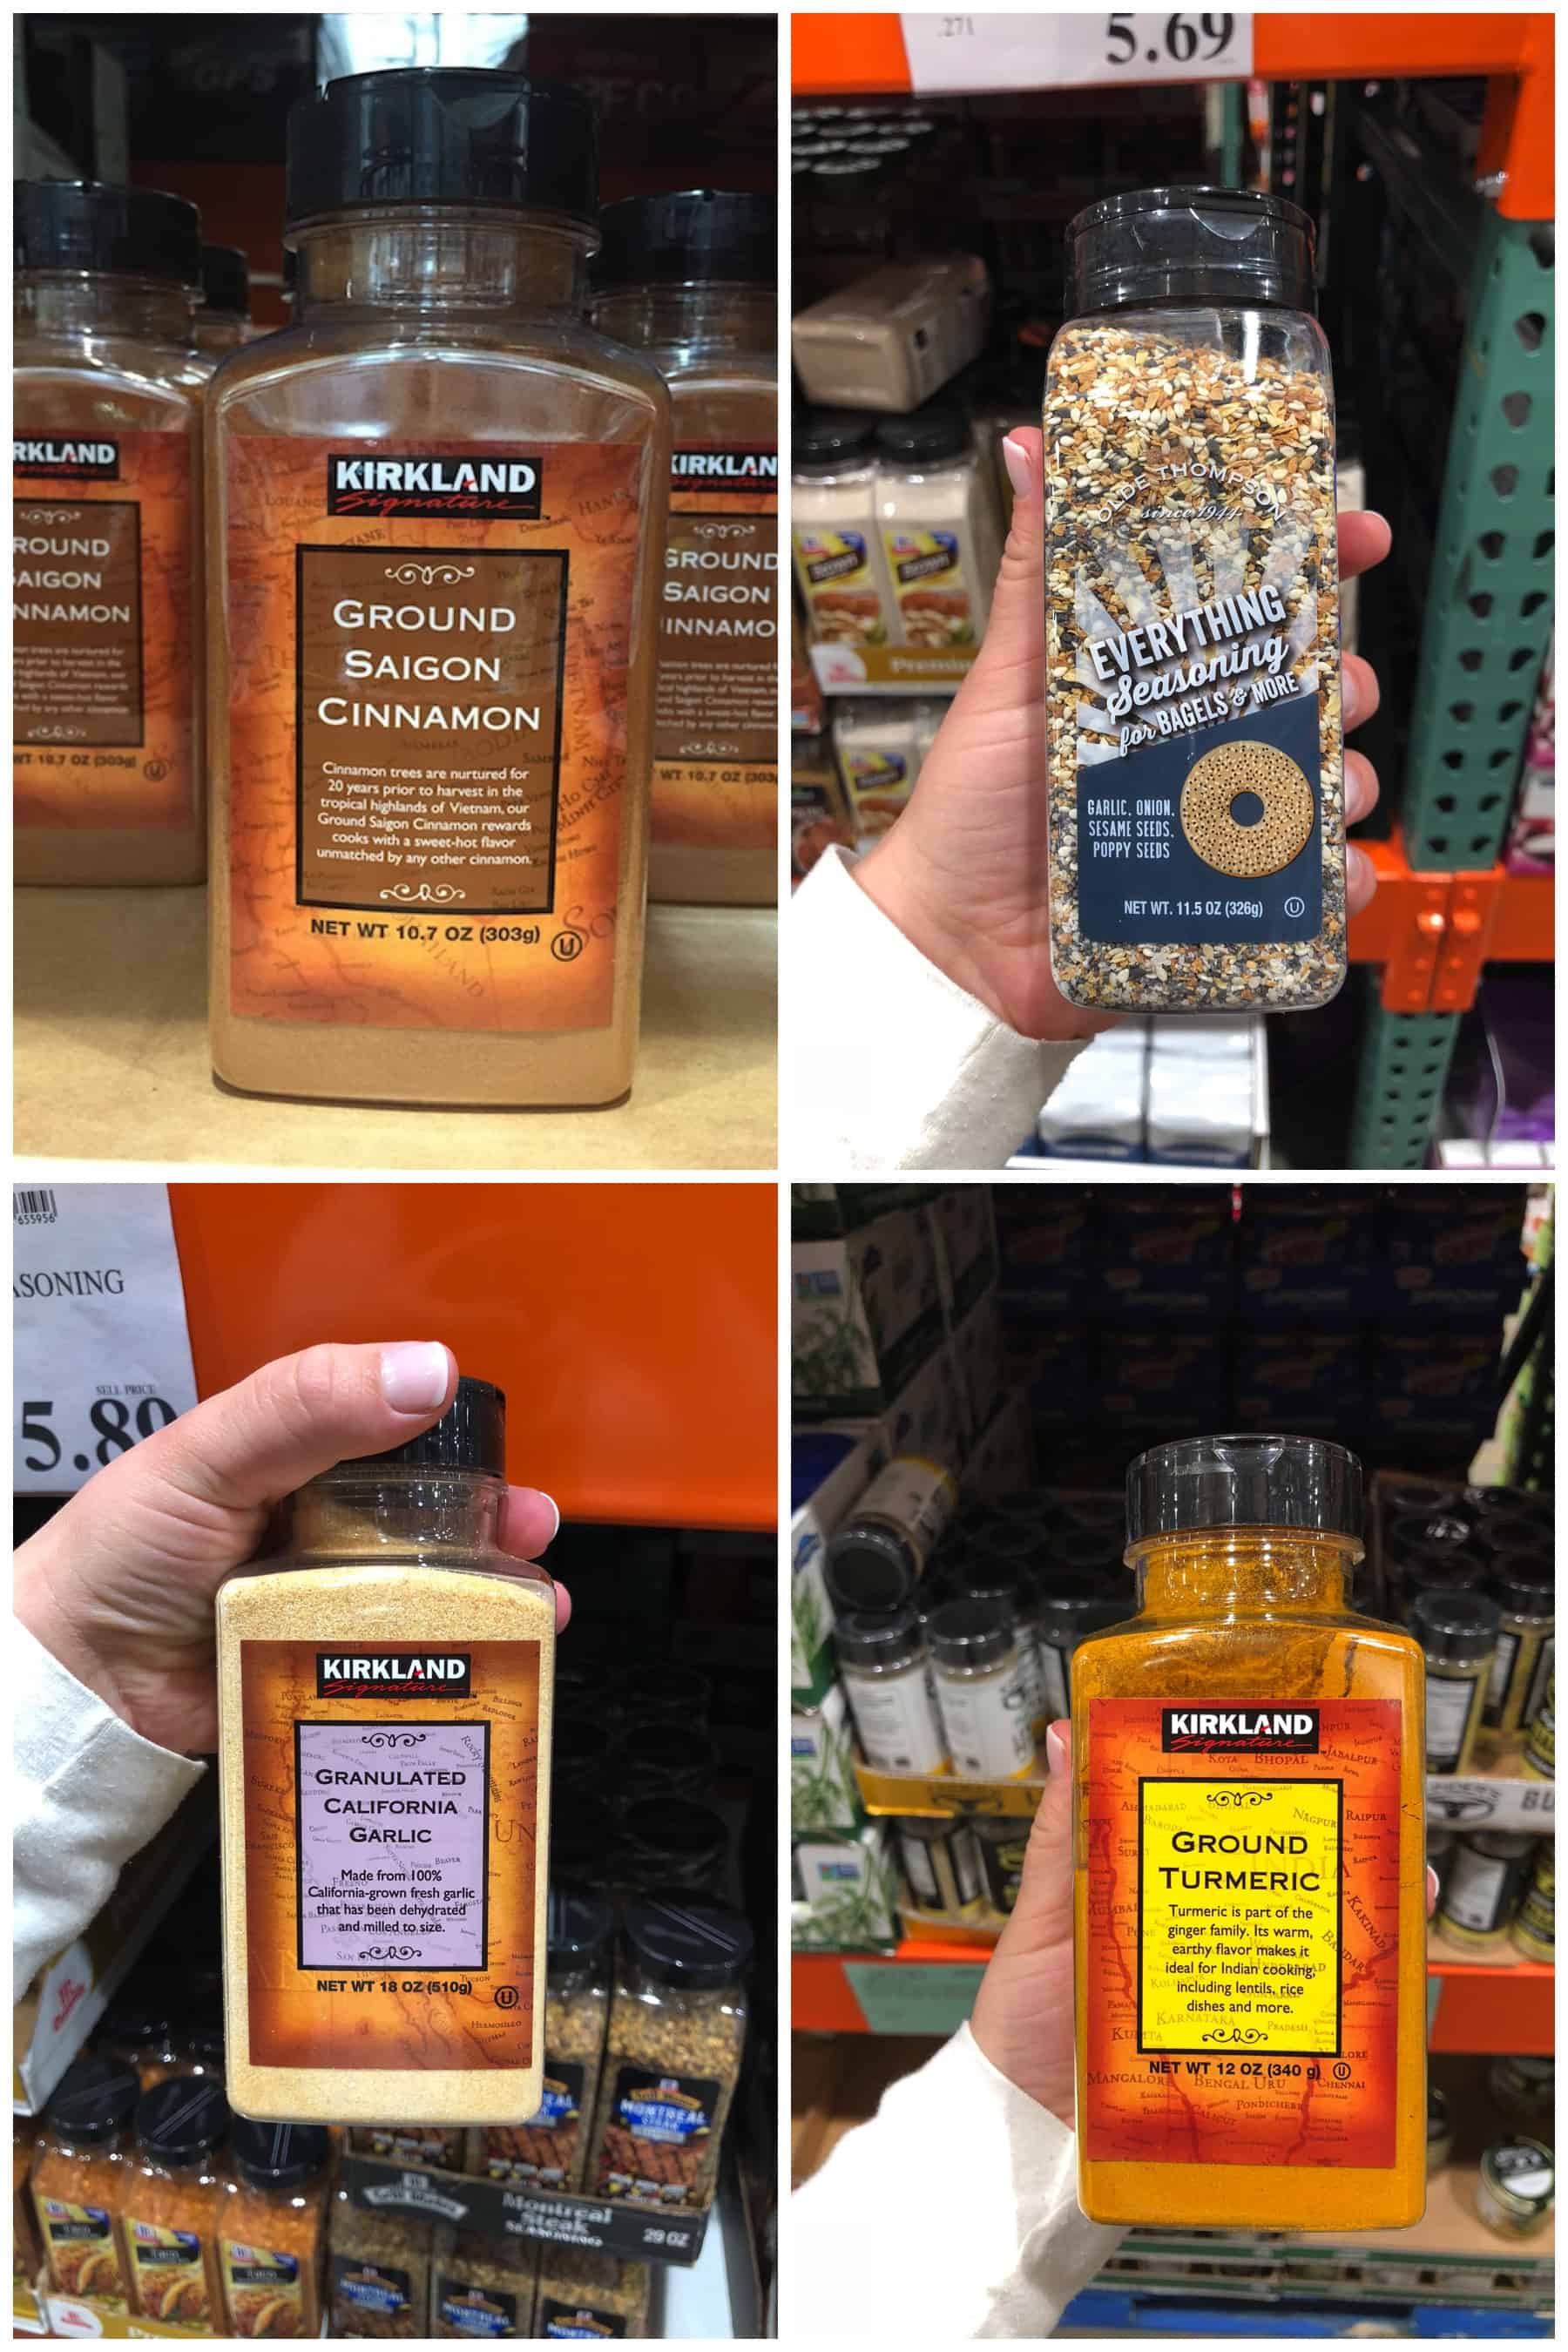 Whole30 compliant seasonings and spices found at Costco